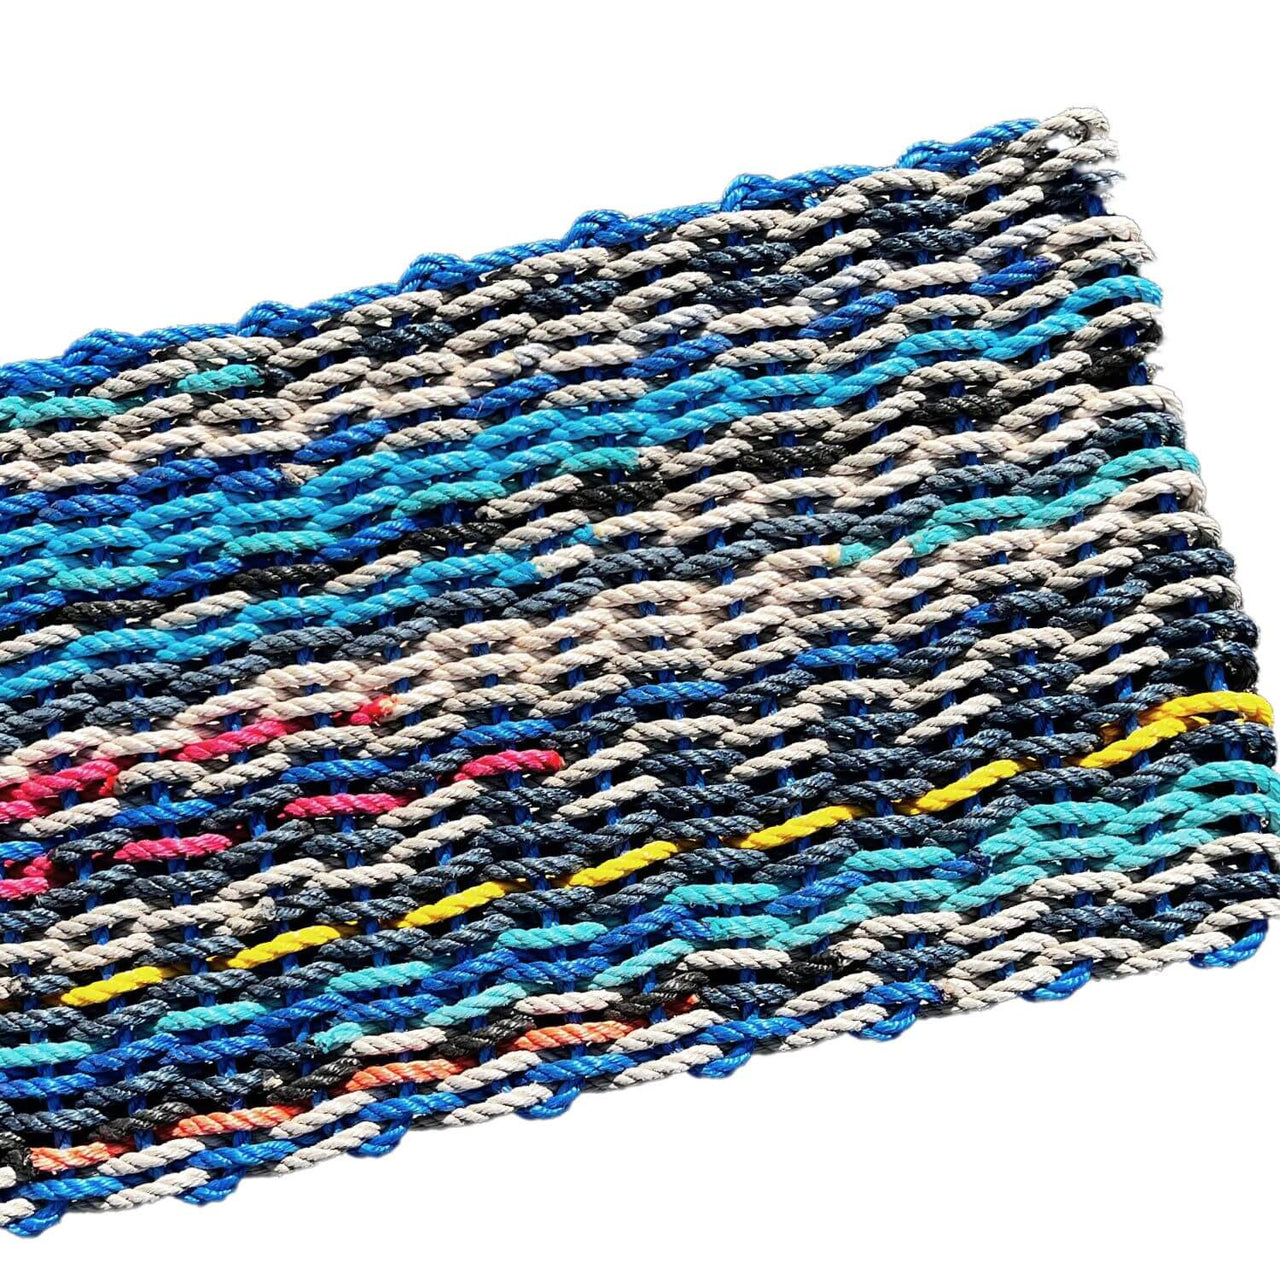 Premium Select Recycled Lobster Rope Doormat, Thin Stripes, 18 x 30, Angled View